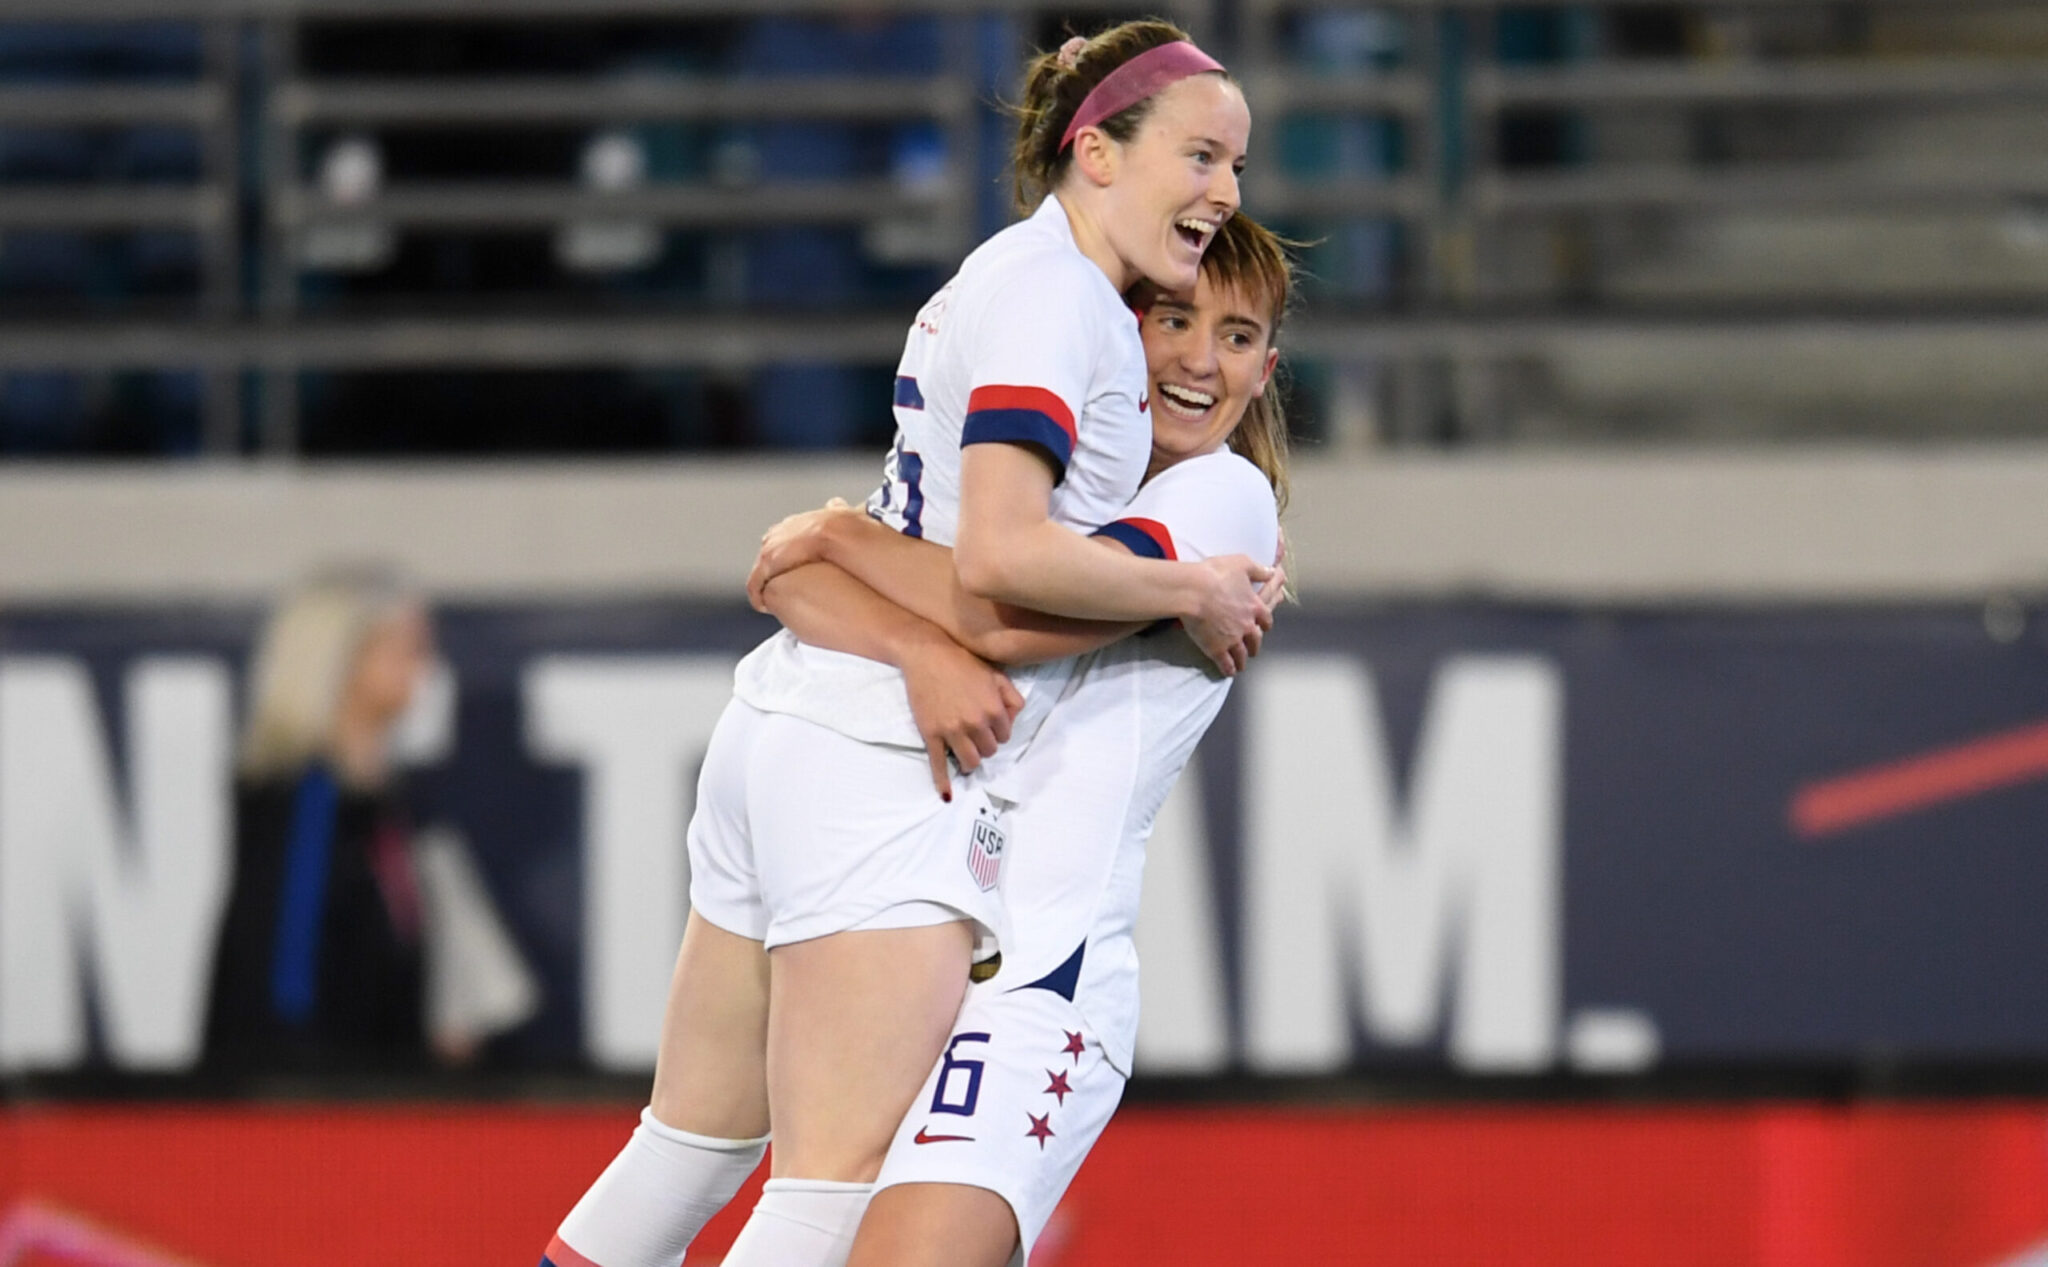 Lavelle picks up two assists as USWNT bests Costa Rica in final match of 2019 Featured Image